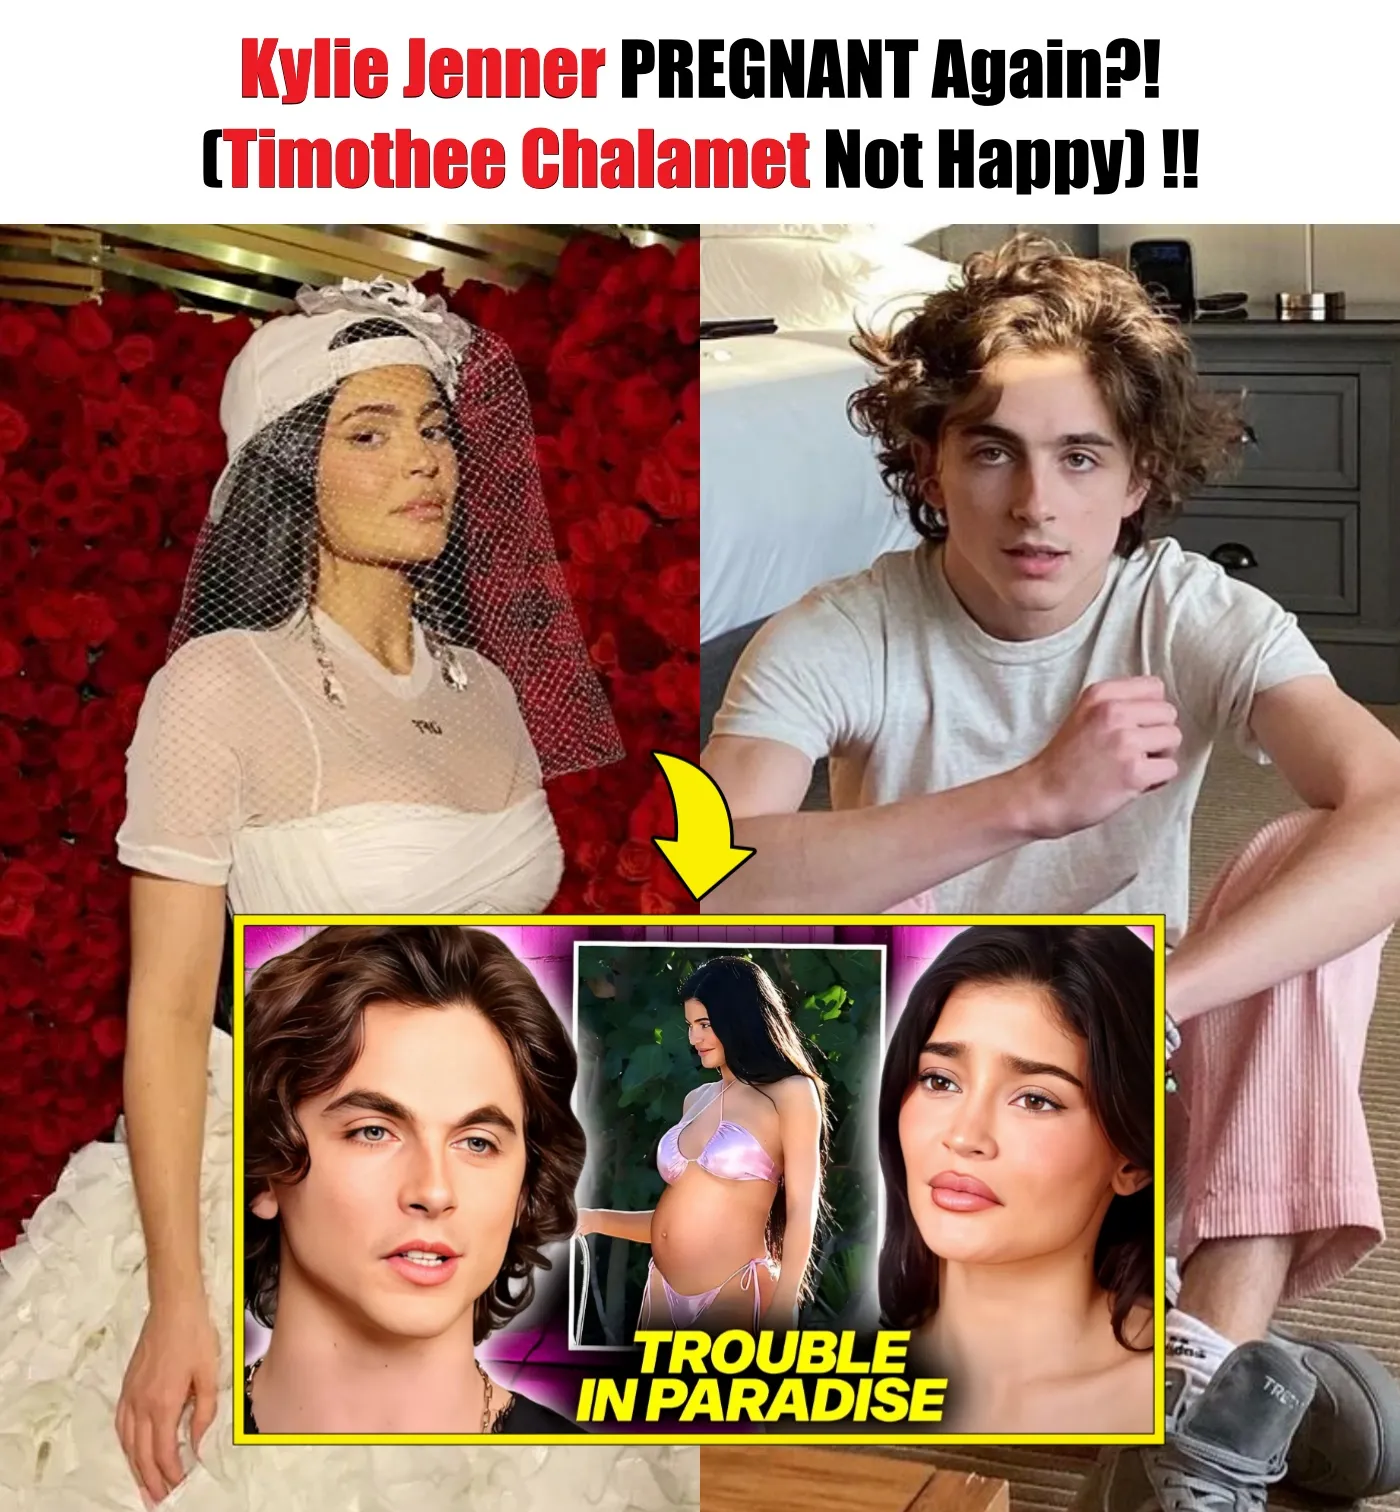 Cover Image for Kylie Jenner PREGNANT Again?! (Timothee Chalamet Not Happy)